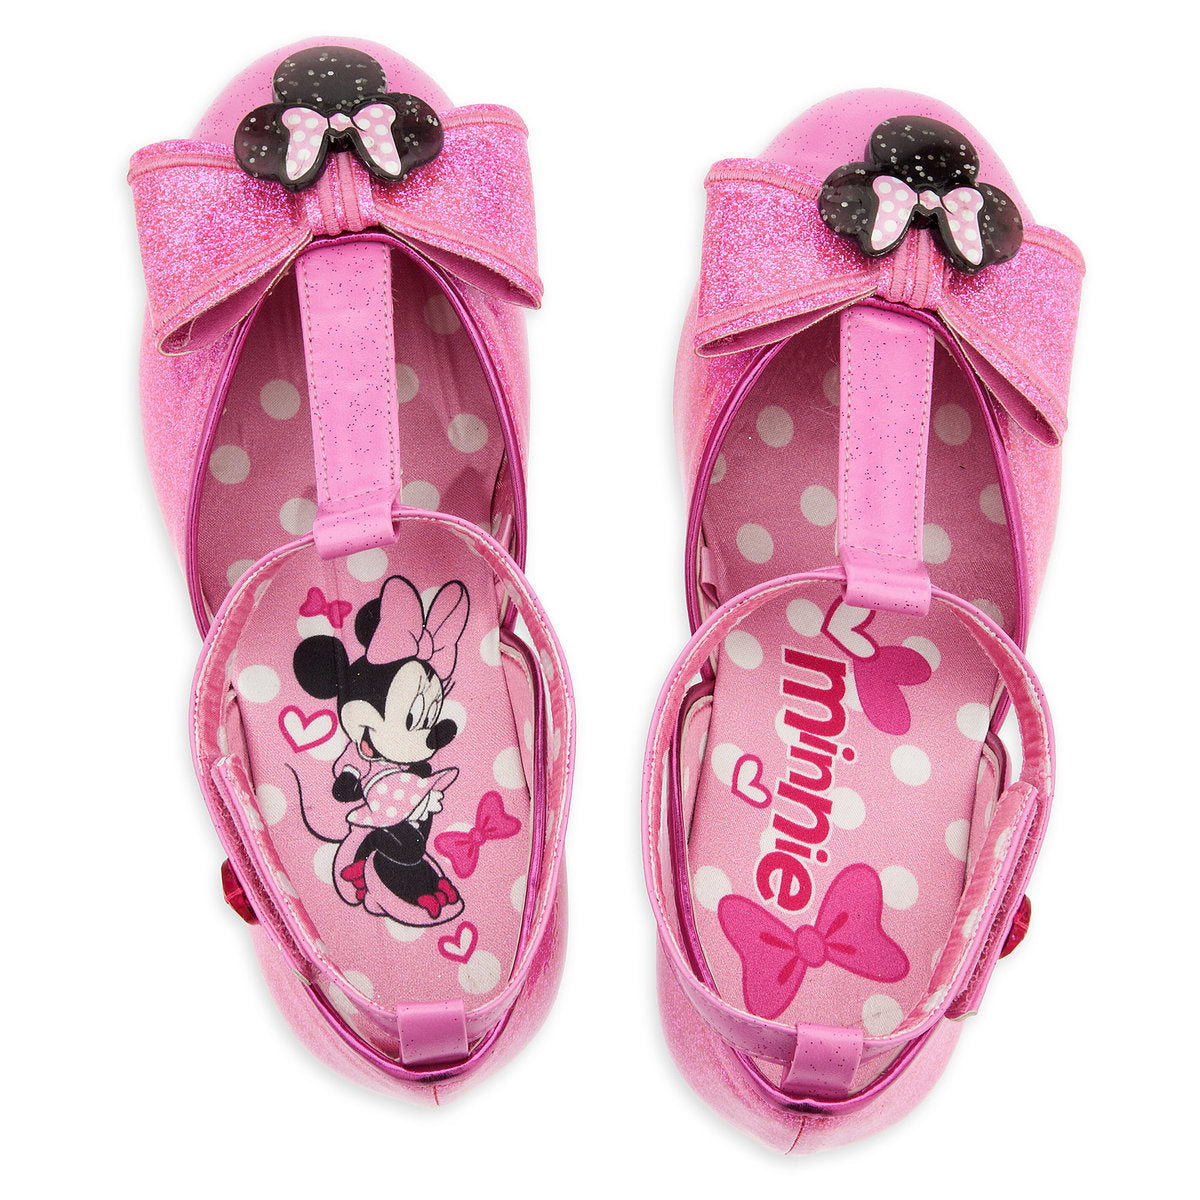 Minnie Mouse Costume Shoes for Kids SIZE UK 4-5